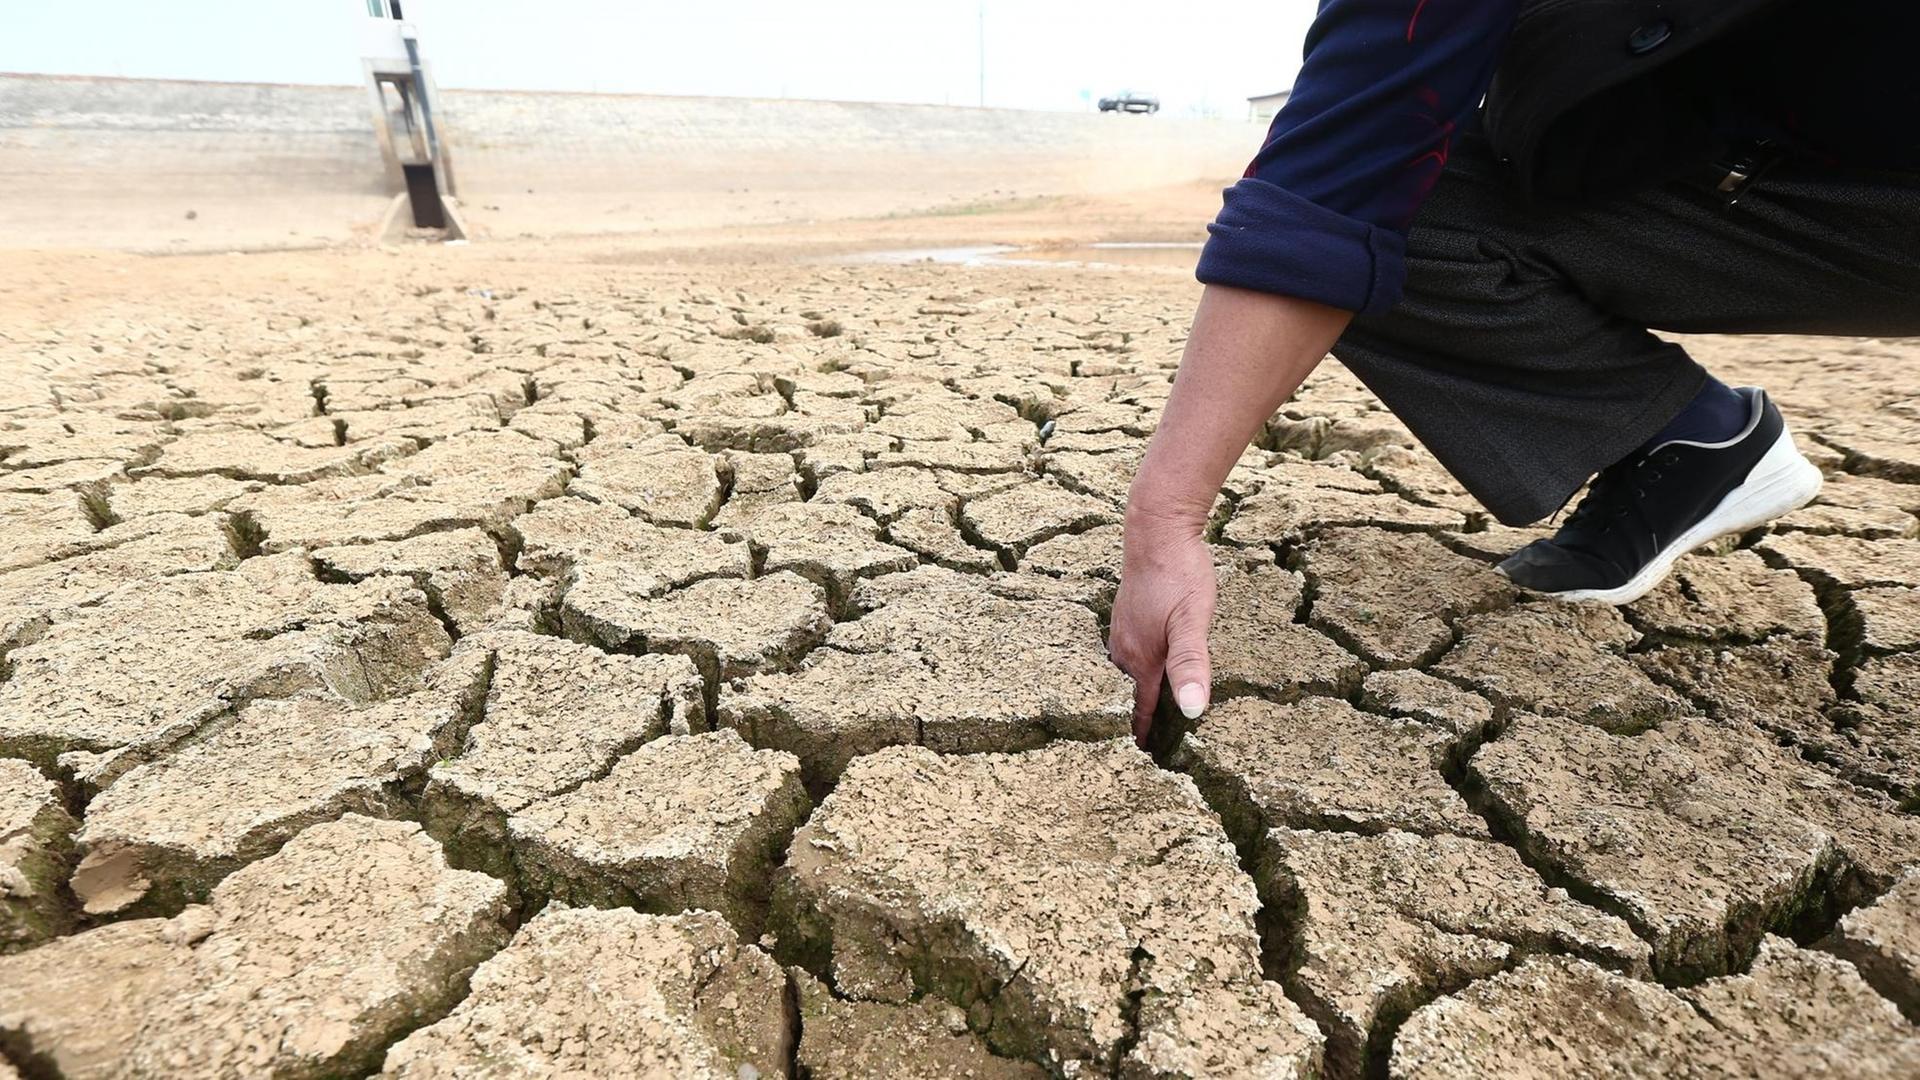 A person puts a hand into the land cracks of the drought-stricken reservoir dried up due to prolonged drought in Anqing city, east China's Anhui province, 6 November 2019. The Ministry of Finance allocated emergency funding of 100 million yuan ($14.2 million) for drought relief in five provincial regions in Central and Southwest China.